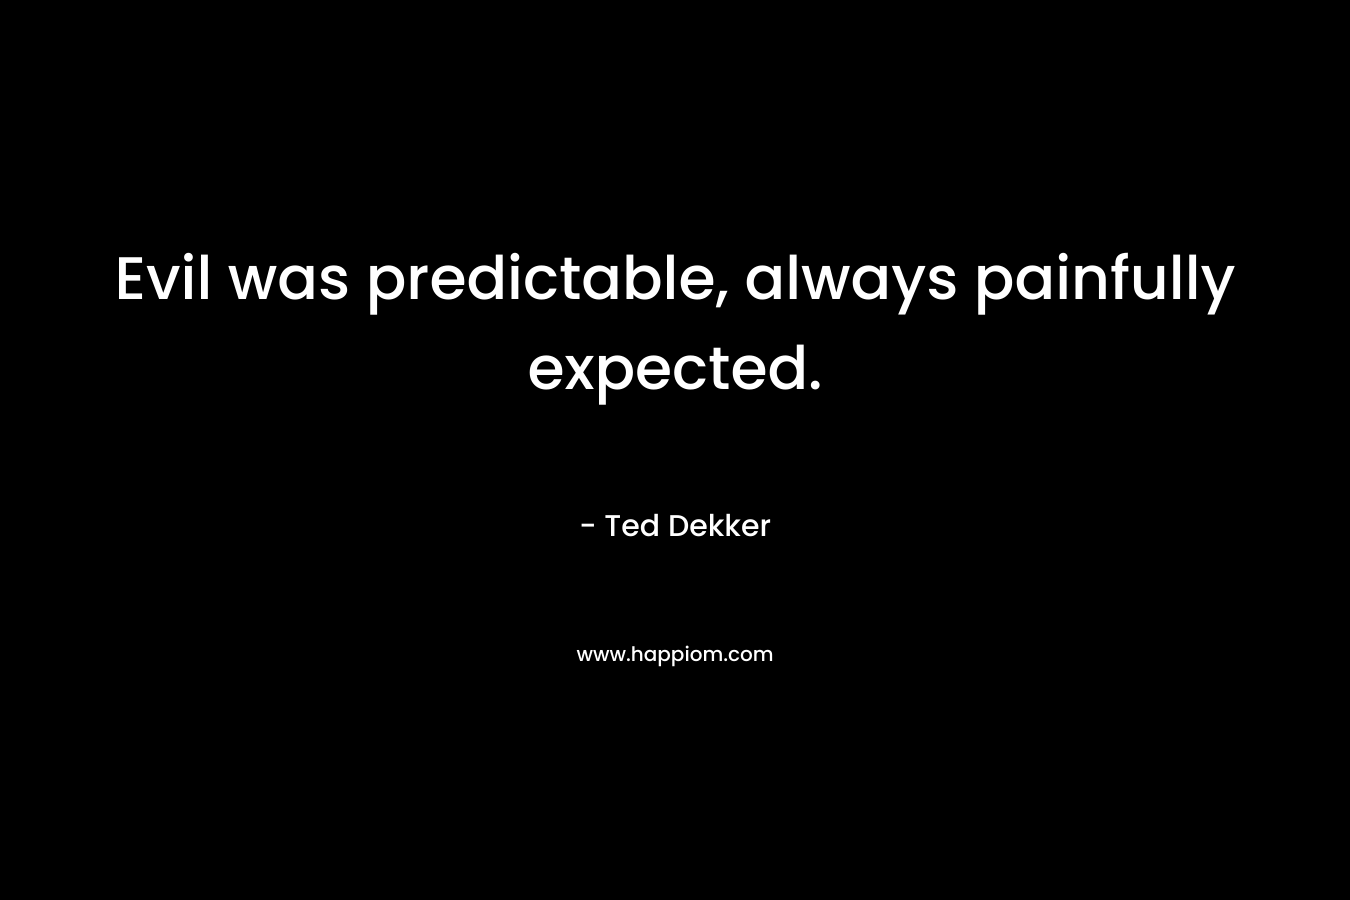 Evil was predictable, always painfully expected. – Ted Dekker